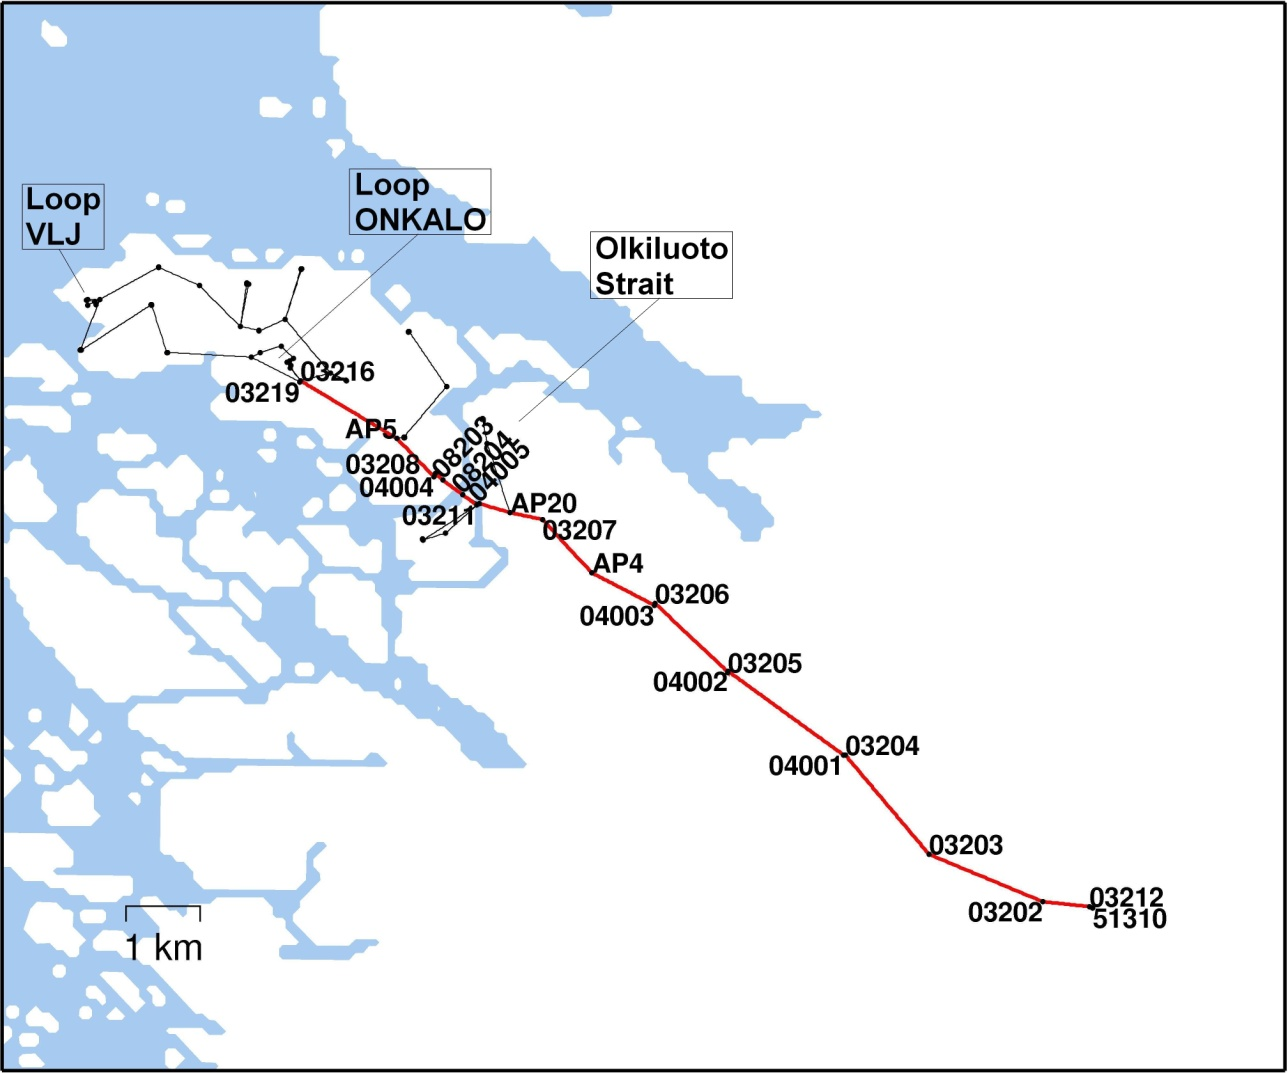 Figure 1. Levelling network in the 2011 adjustment. The Lapijoki-Olkiluoto line (red line) was measured in 2011.